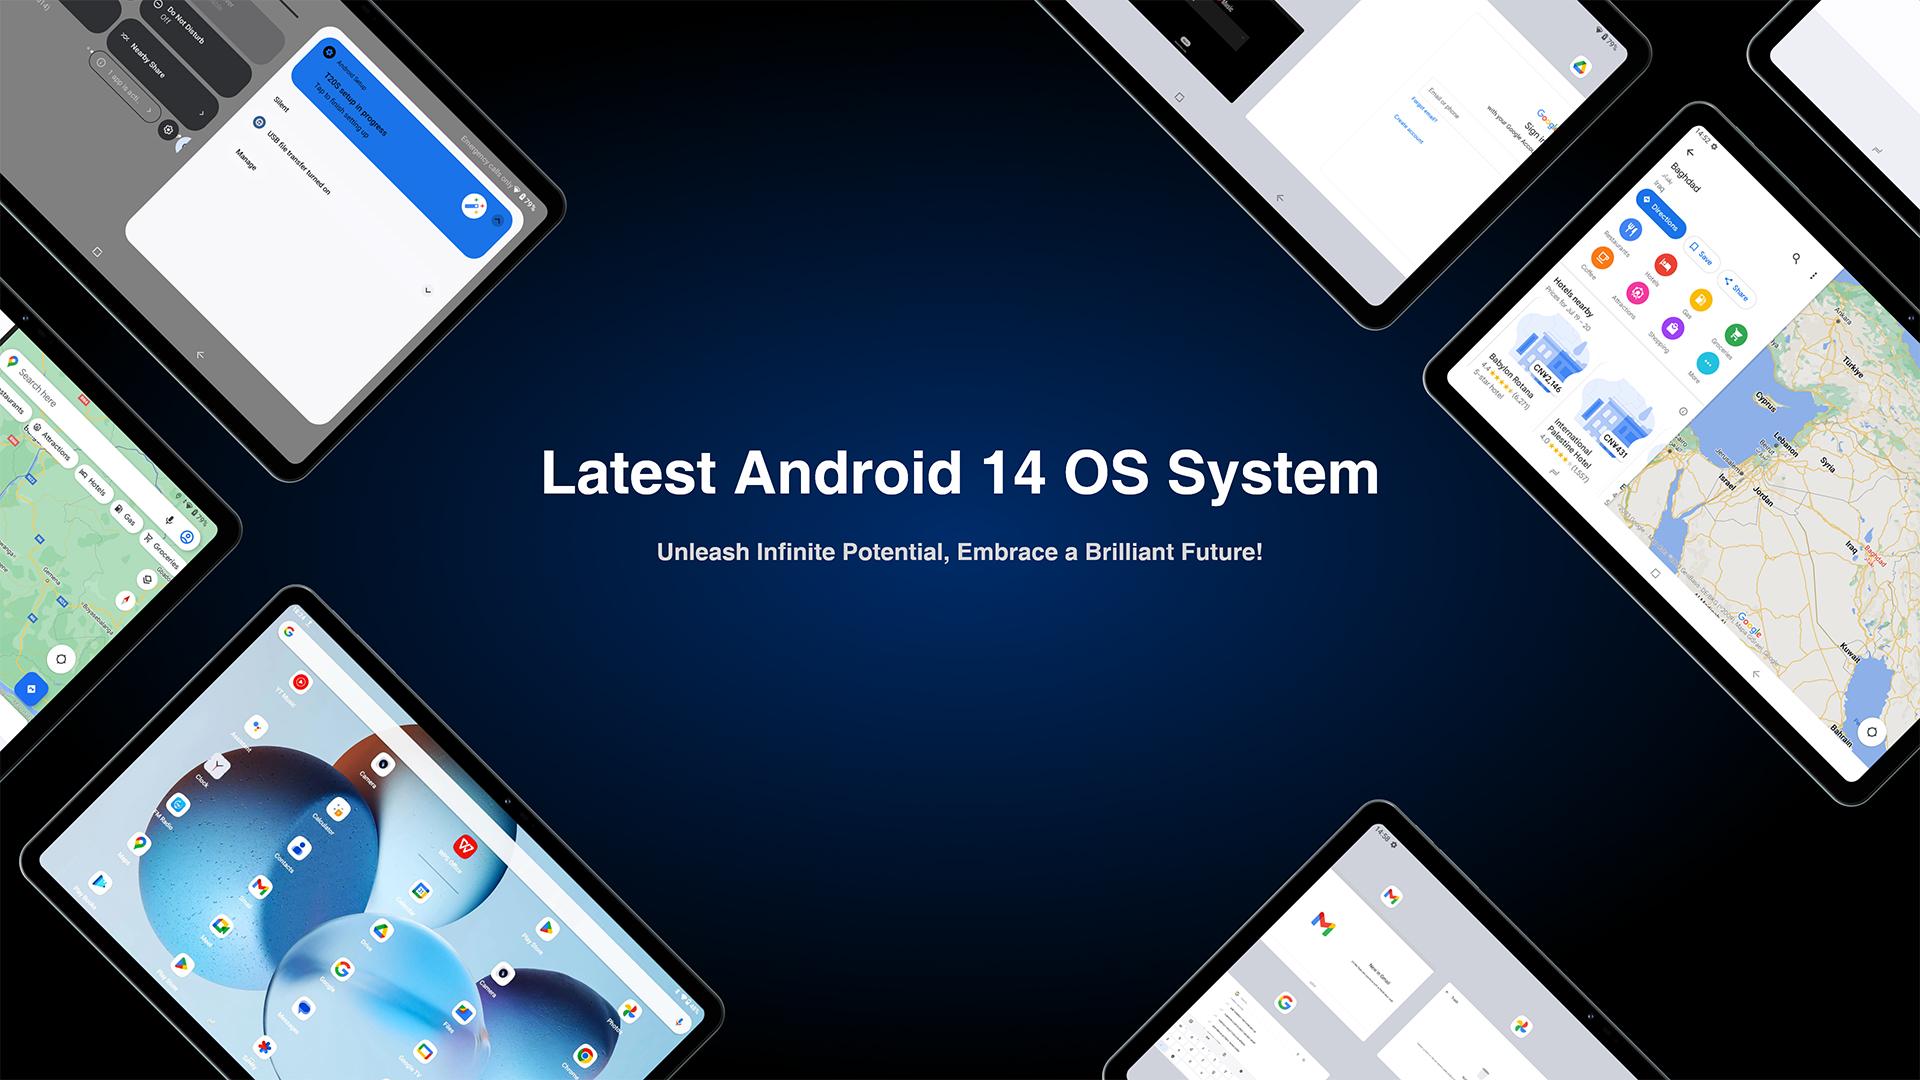 Android 14 OS System